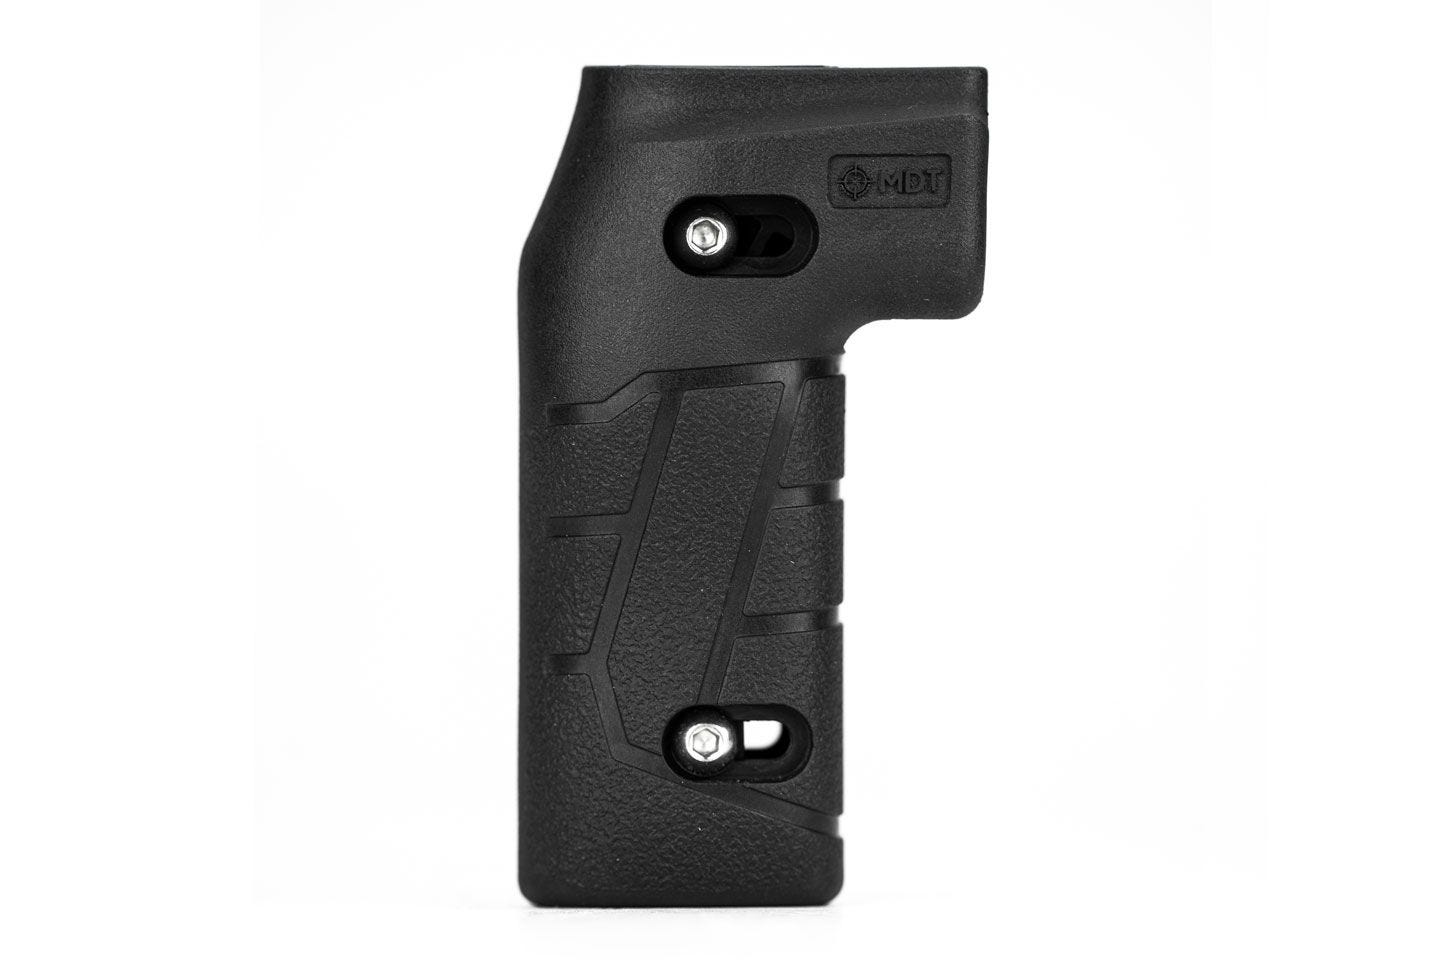 Will the mdt vertical adjustable grip fit on a Savage ba10 stealth